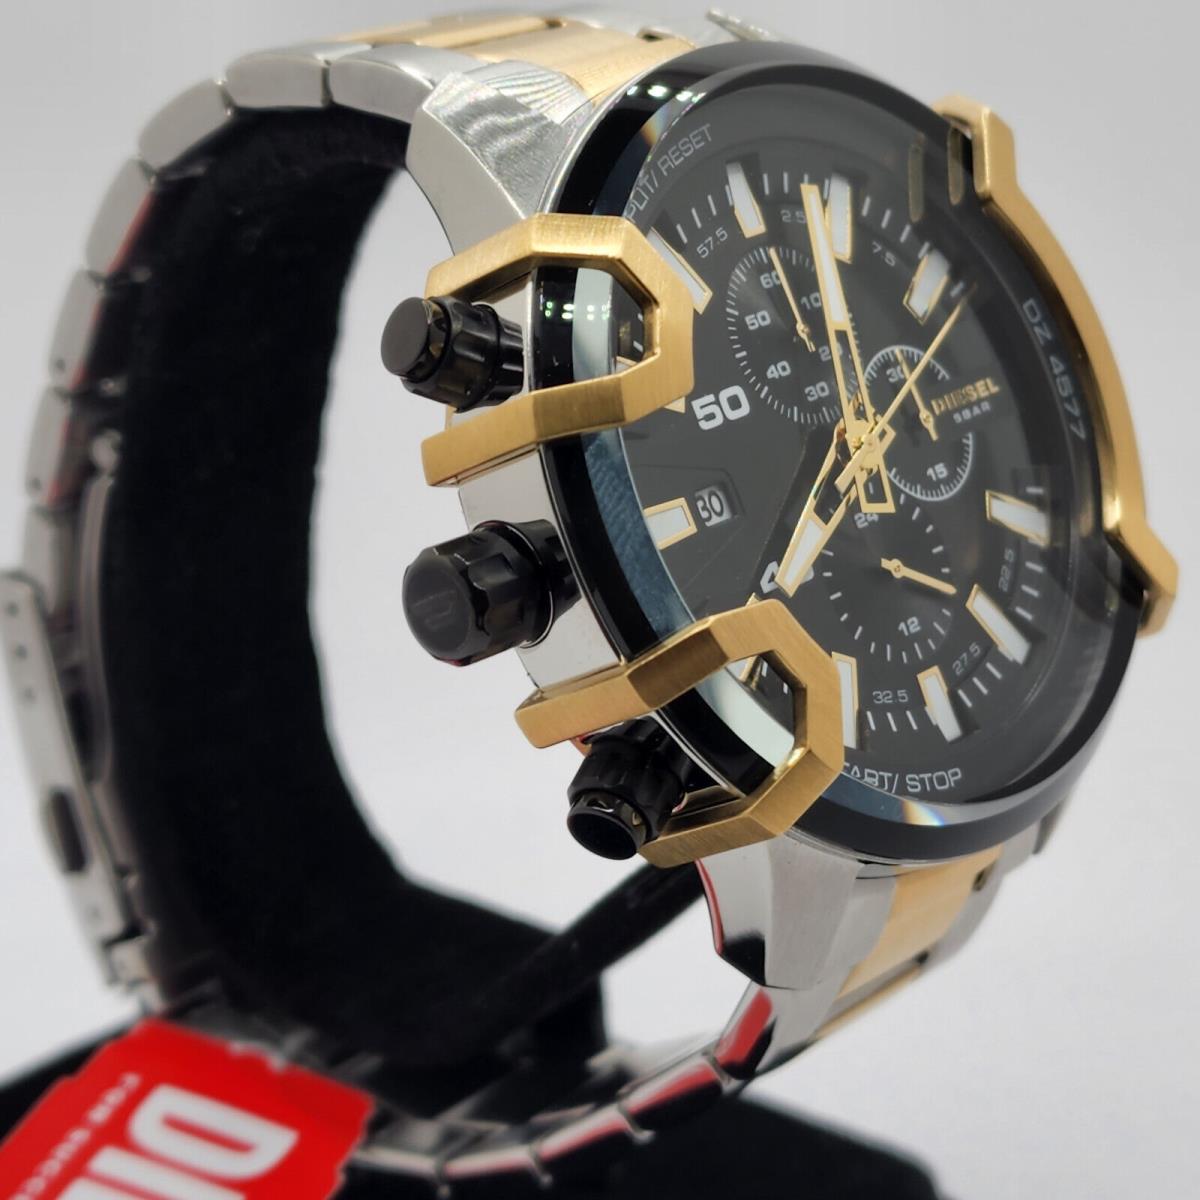 Diesel Men`s Watch Griffed Chronograph Two-tones Stainless Steel DZ4577 |  698615142316 - Diesel watch Griffed - Black Dial, SILVER AND GOLD Band,  Black Bezel | Fash Direct